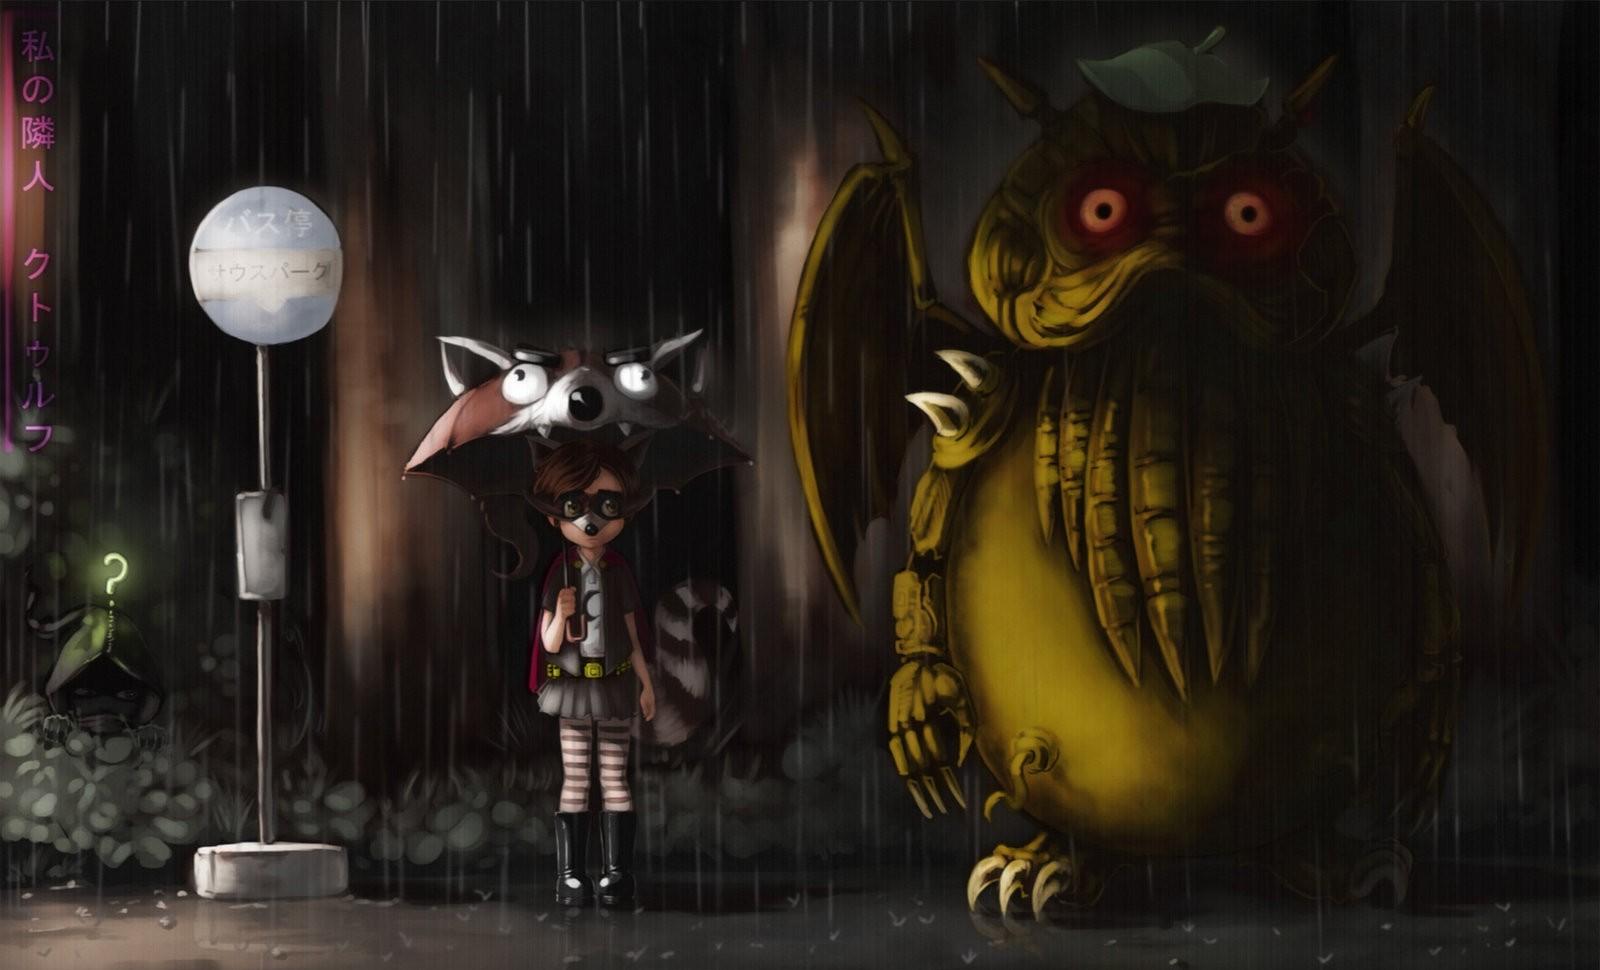 4589206 umbrella The Coon Cthulhu anime crossover artwork